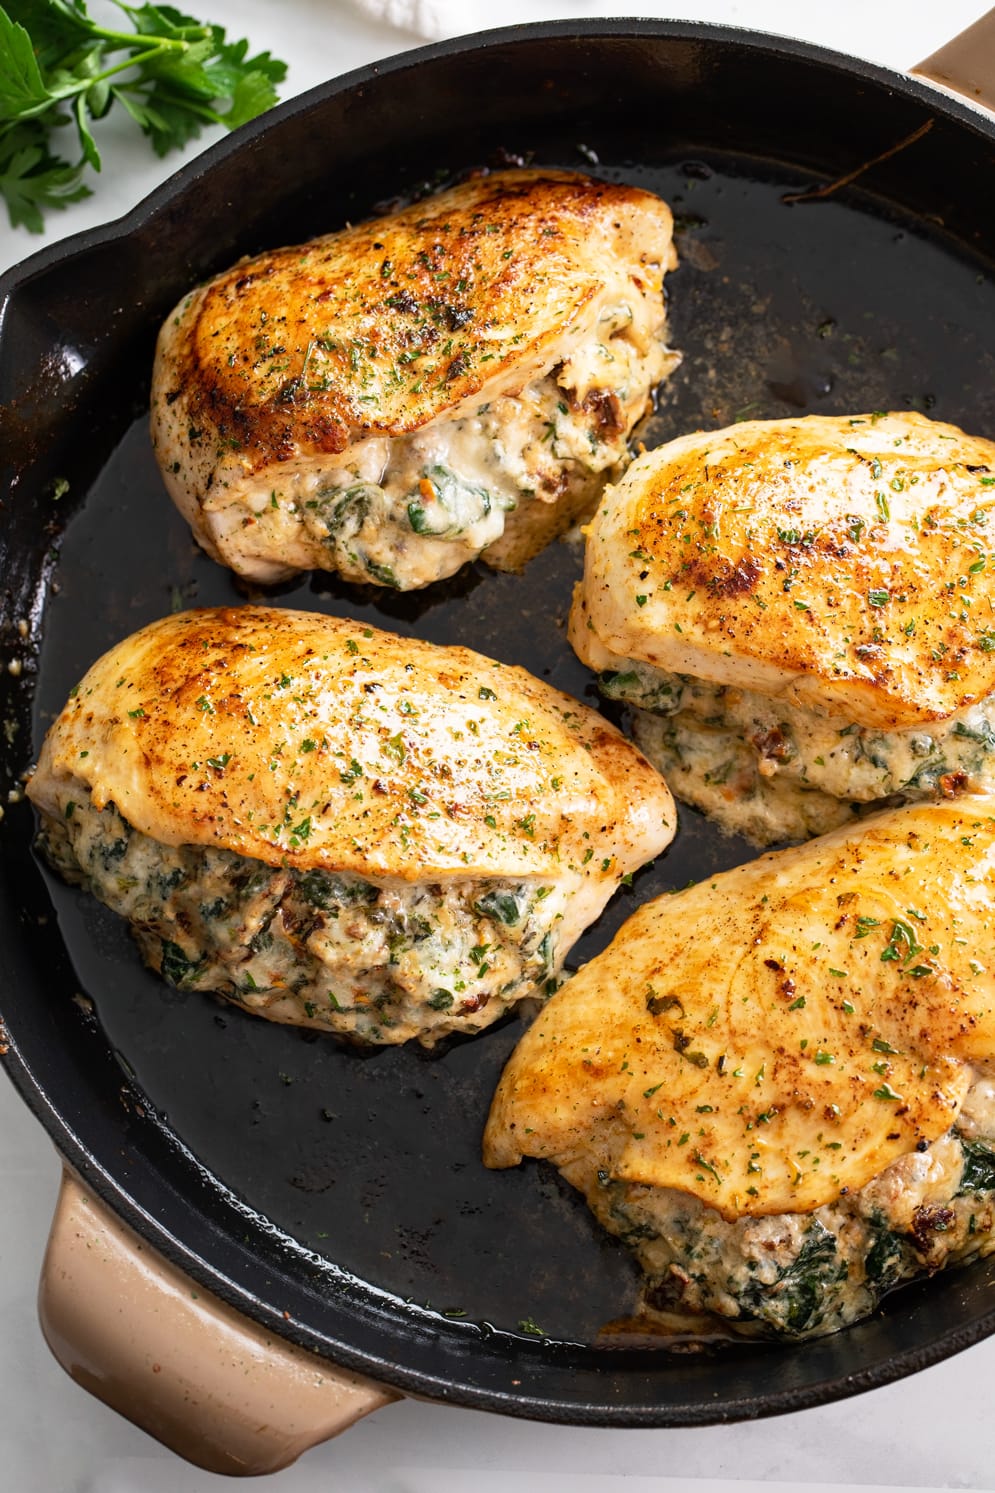 A skillet of Stuffed Chicken Breast filled with spinach, sundried tomatoes, and cheese.